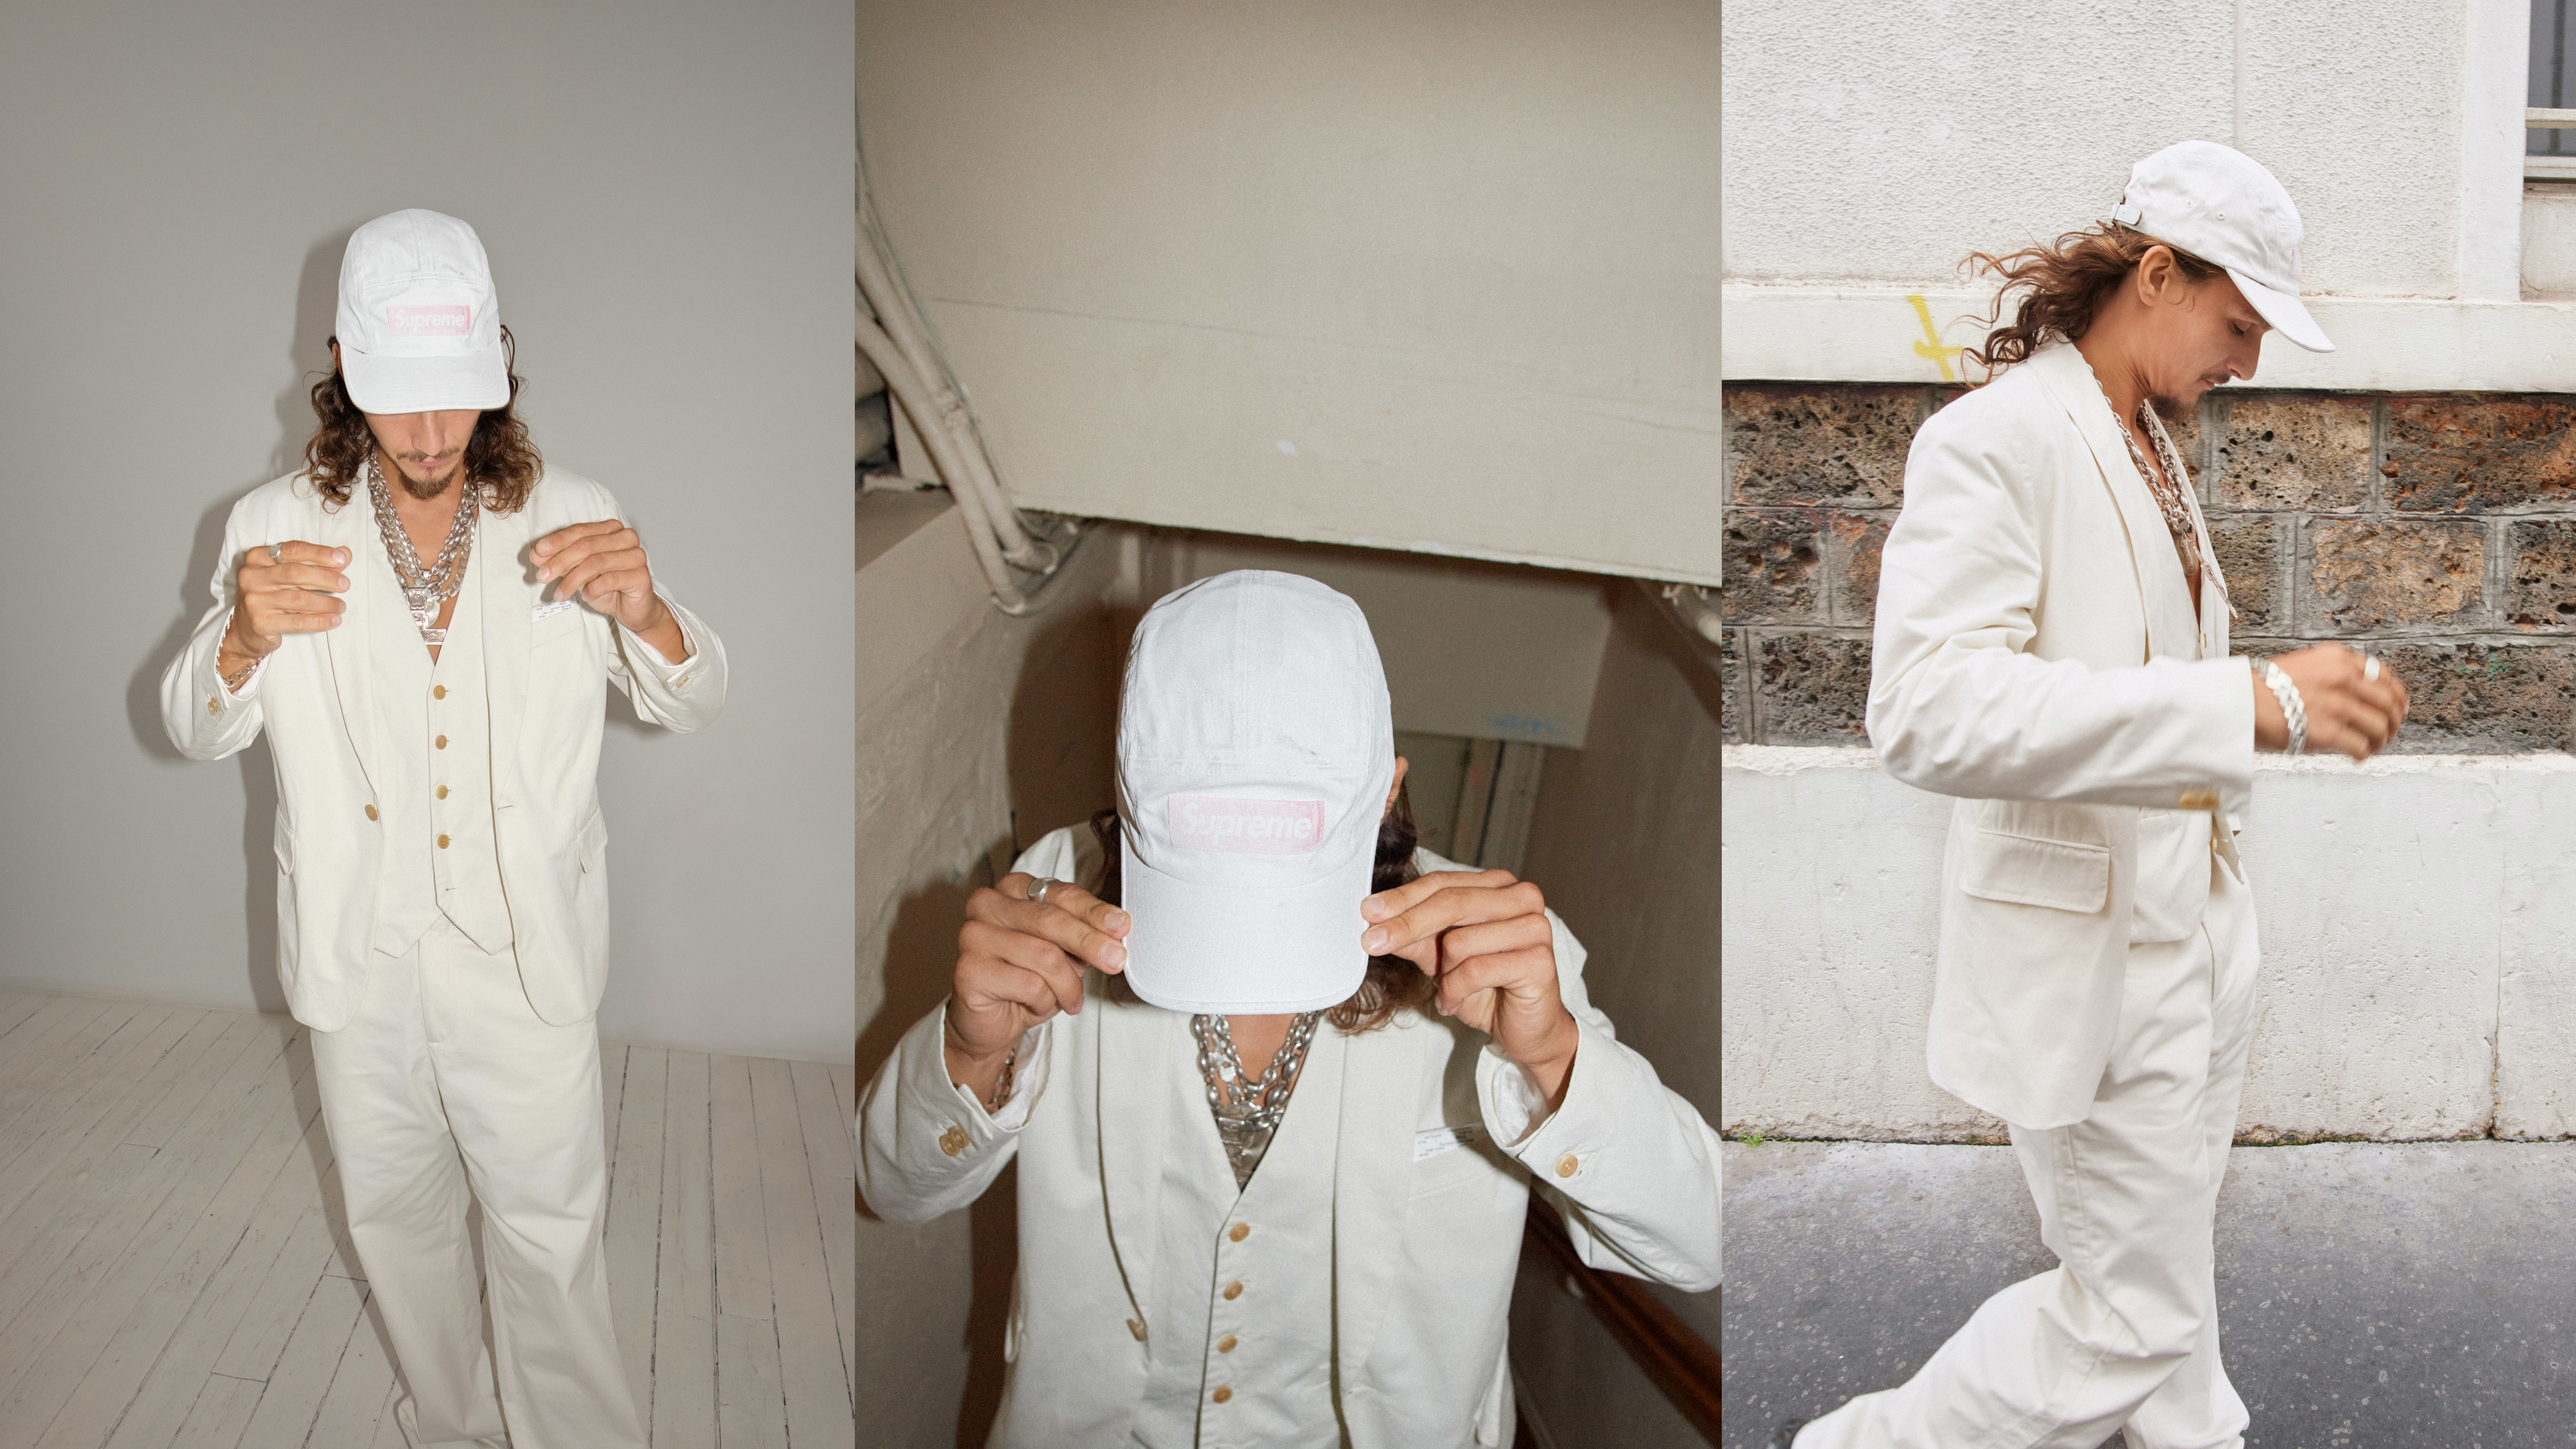 Three poses of a person in a stylish cream suit and hat with layered necklaces, indoors